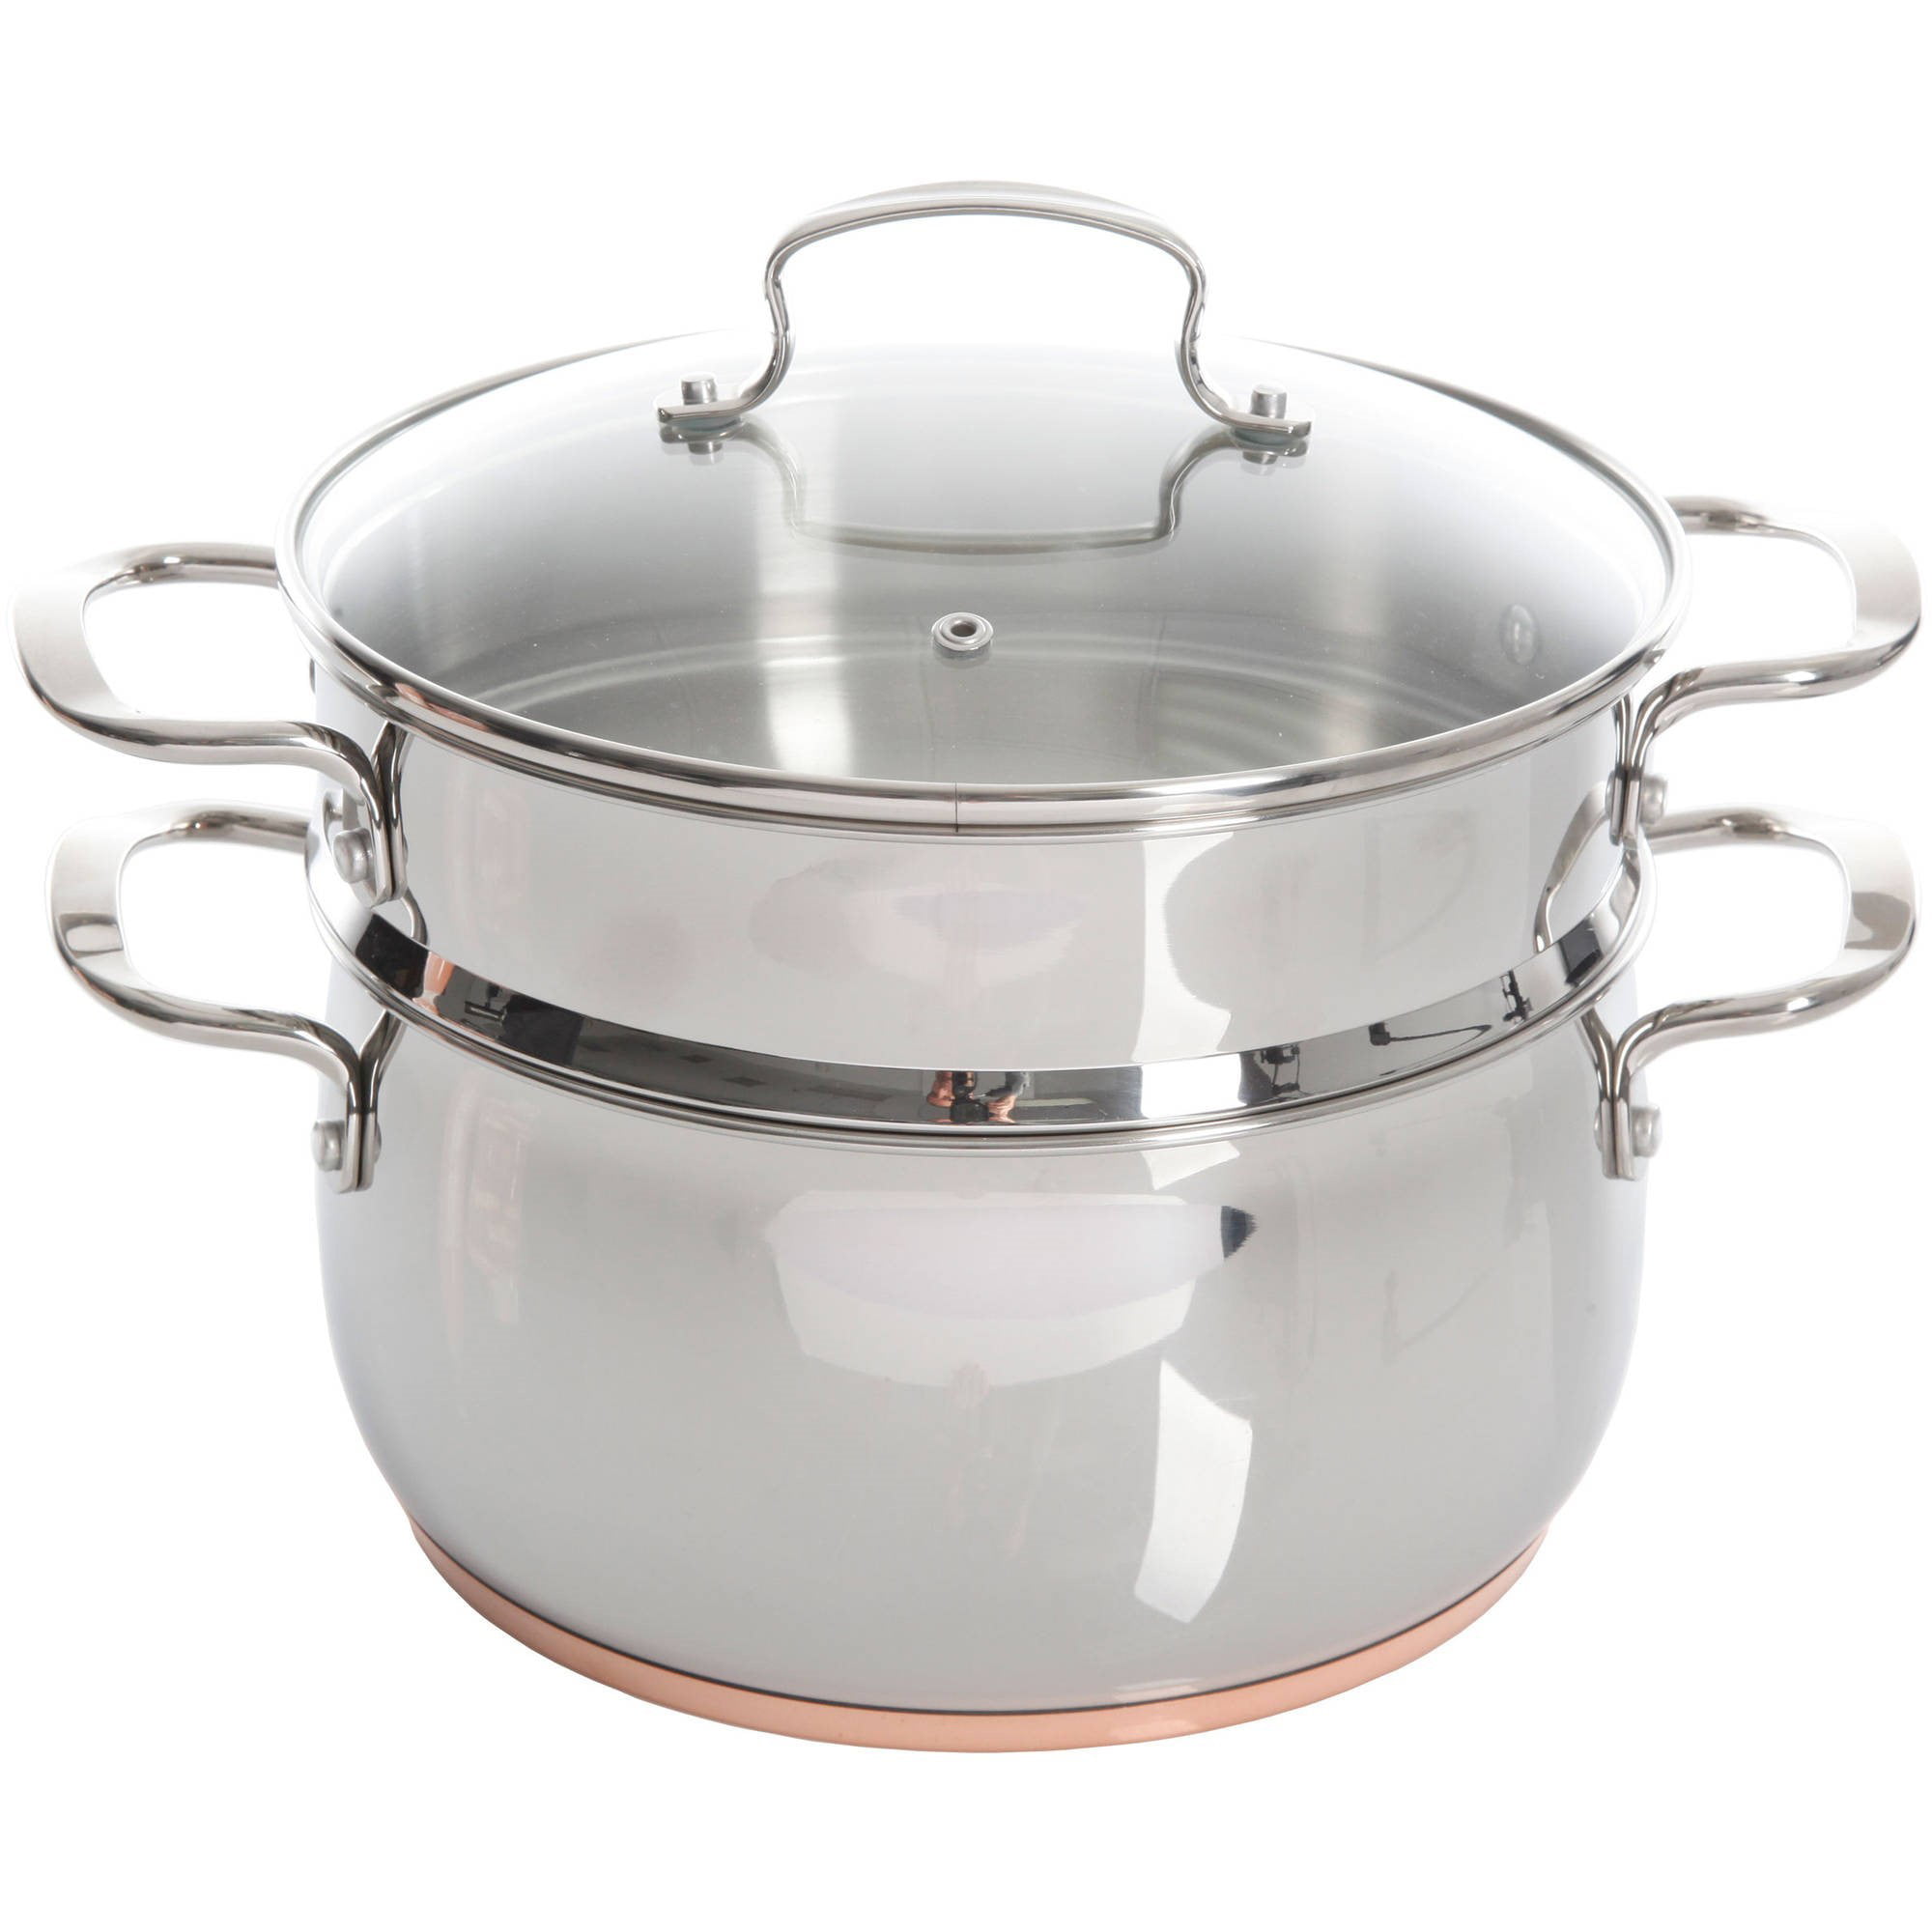 Camp Kitchen The Pioneer Woman 8 Quart Stainless Steel Stock Pot Cooking  USA P230506 From Musuo10, $46.5